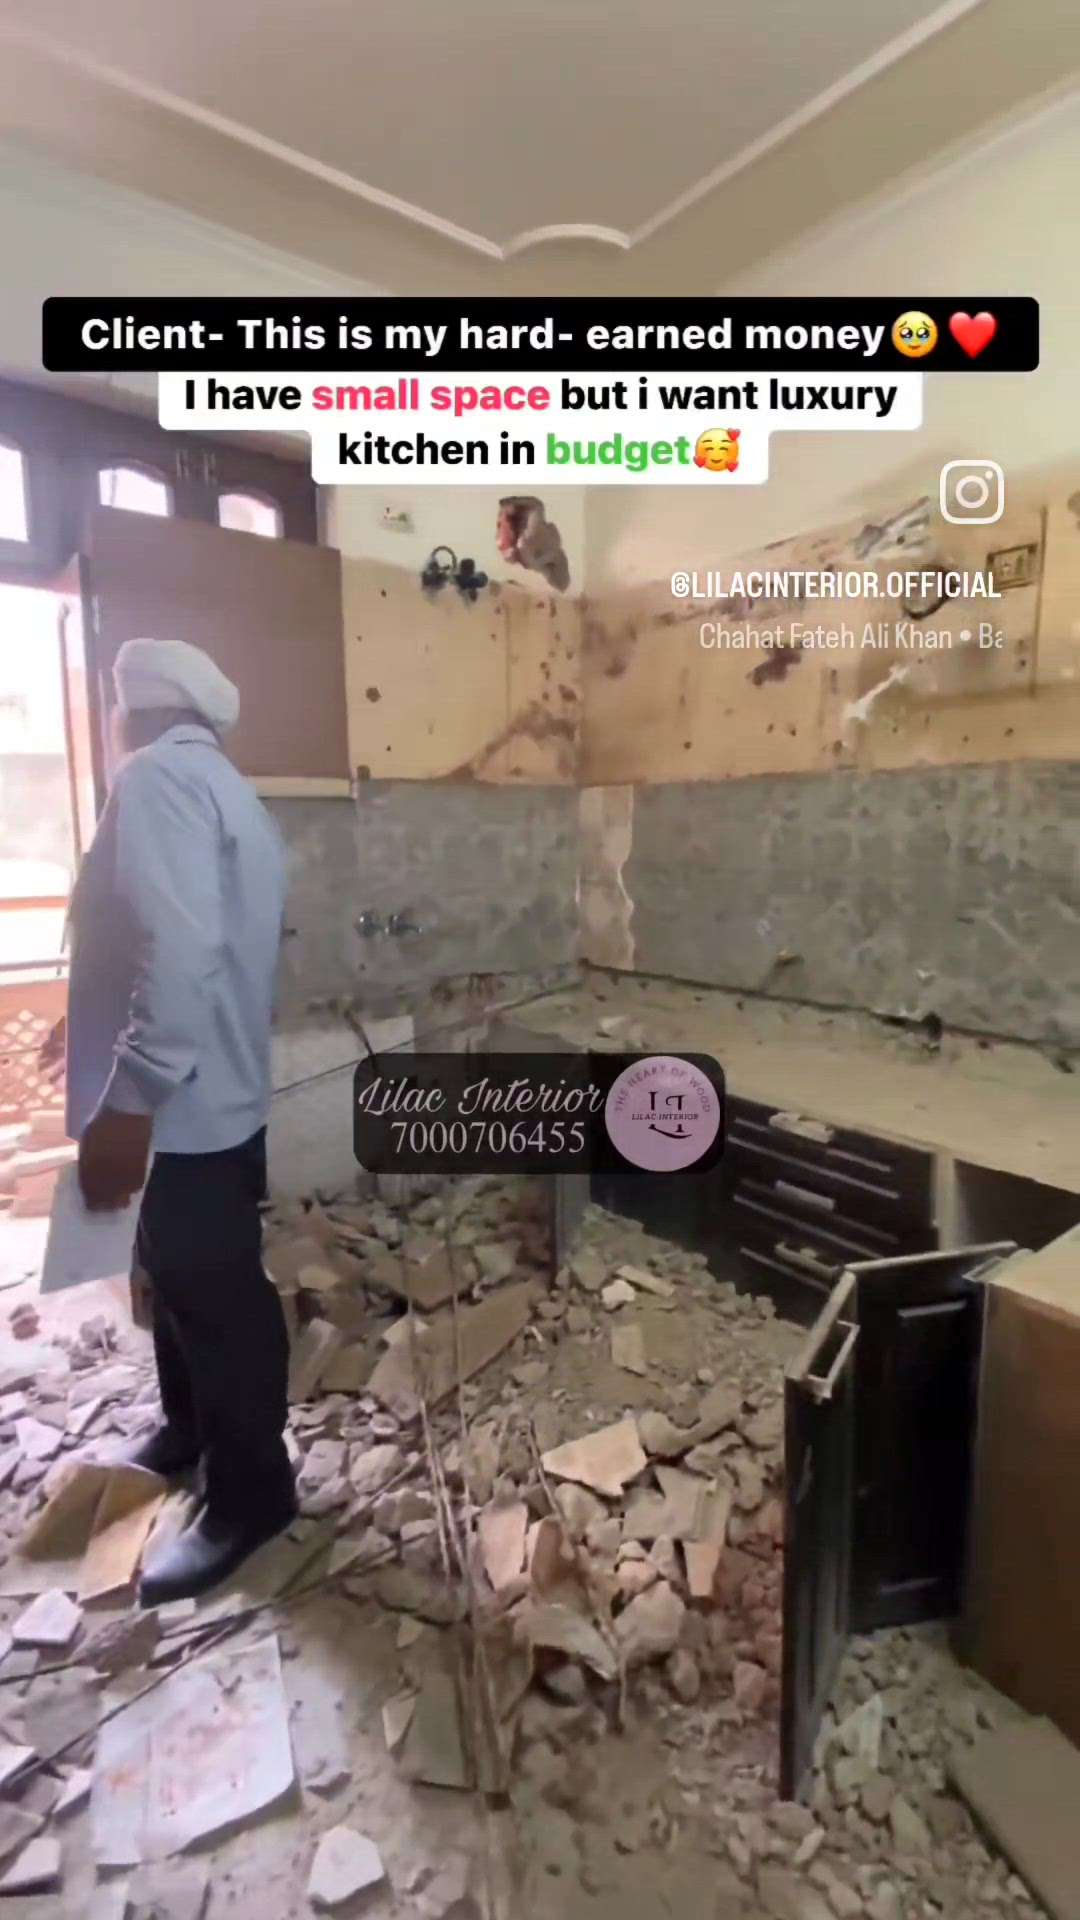 Drop your comment by guessing the price of this Luxury  Kitchen which is renovated by us ✅
.
.
20 Year's Old Kitchen Renovation by Lilac Interior 🤩😍
.
.
#ModularKitchen #luxurykitchens
#kitchendesigns #latestkitchentrends
#luxurylifestyle #kitchenlighting #kitchendecor #kitchendesignideas #kitchencabinets #kitchenware #kitchenisland #openkitchendesign #luxurioushome.
.
.
.
#trendingreelsvideo #reelsinstagram #viralsong #viralvideos #mykitchenstyle #interiordesigner #cooking #foodie #home #kitchenmakeover
@lilacinteriorofficial @lilac_interior  #kolohindi  #kolopost  #koloviral  #kolomaterials  #kolofolowers  #koloprofessional  #kolorsworld